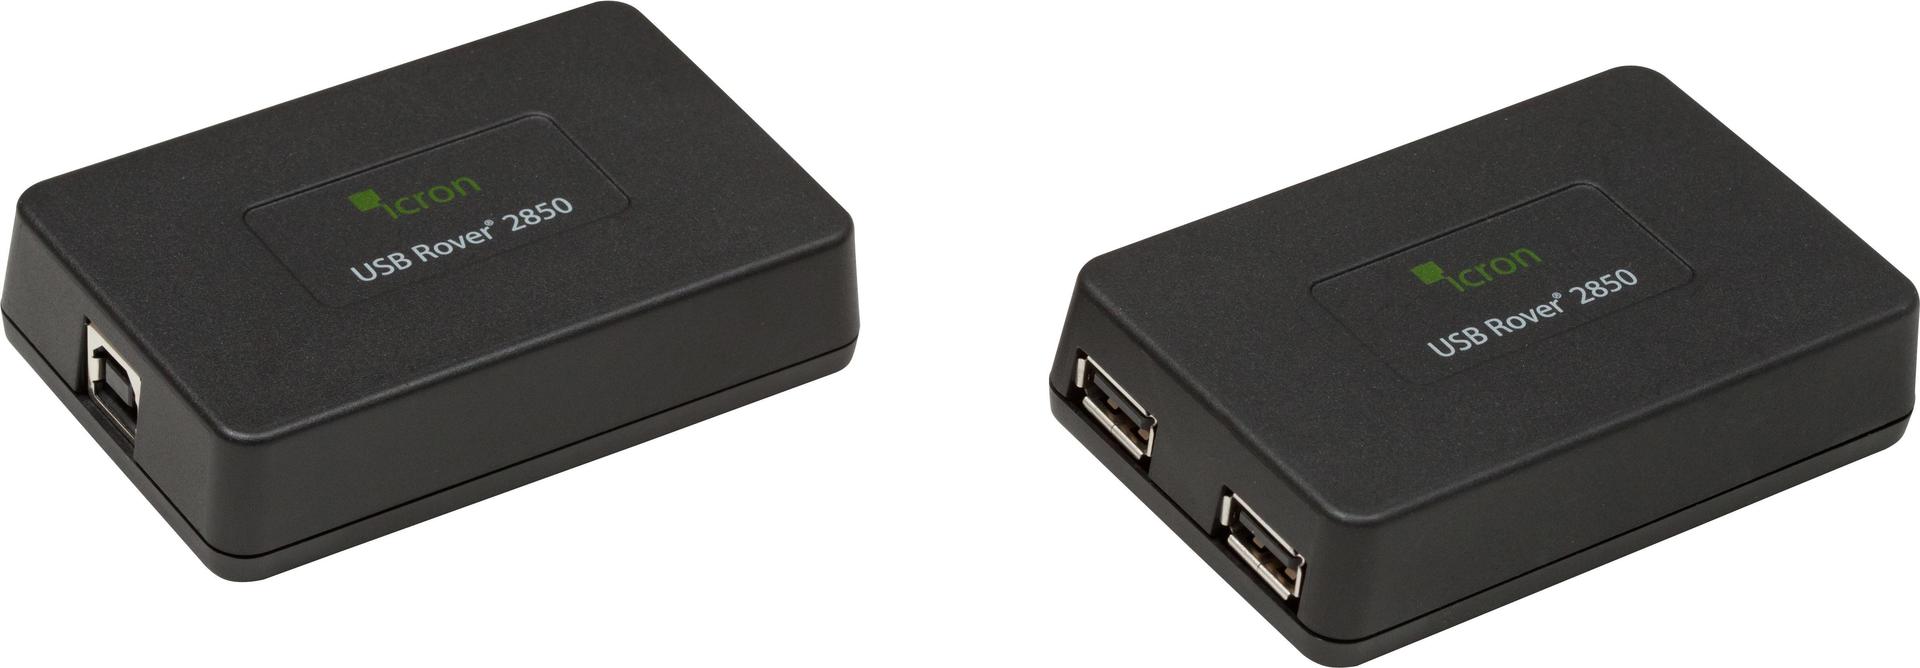 ANALOG DEVICES Icron 00-00312 USB Rover 2850 2-port USB 1.1 extender set. Max. extension distance: 8